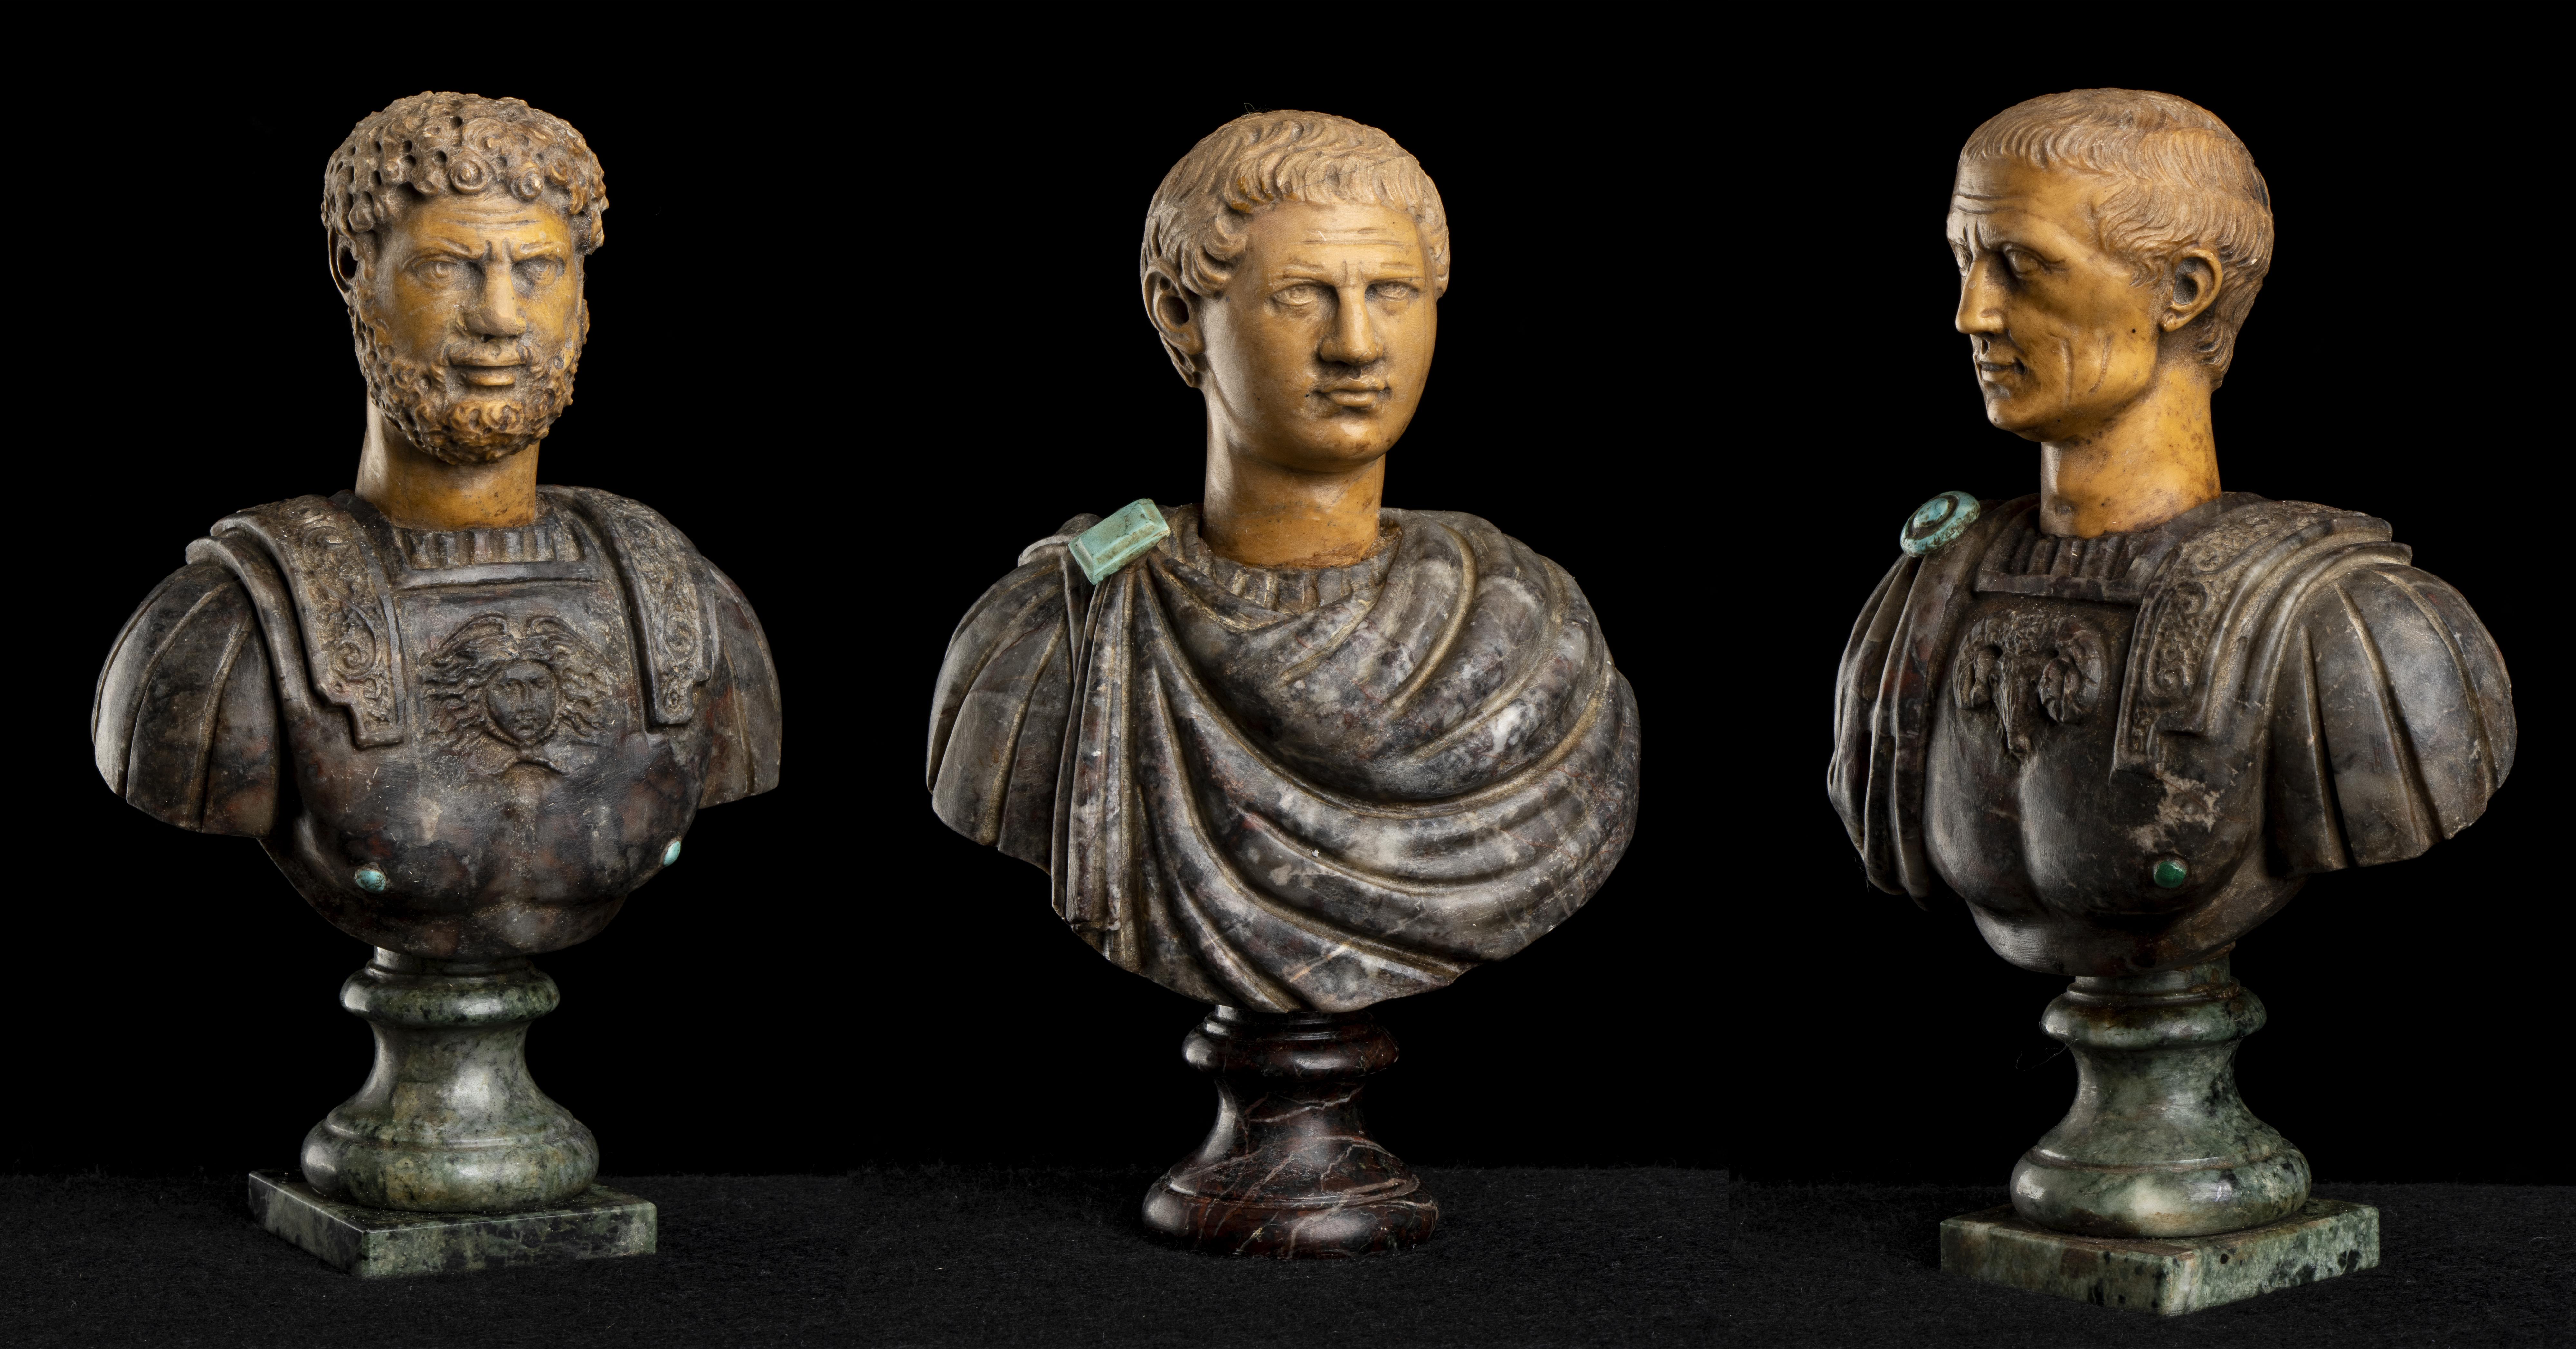 A Grand Tour Set of Three Polychrome Marble Busts Sculptures of Roman Emperors  1